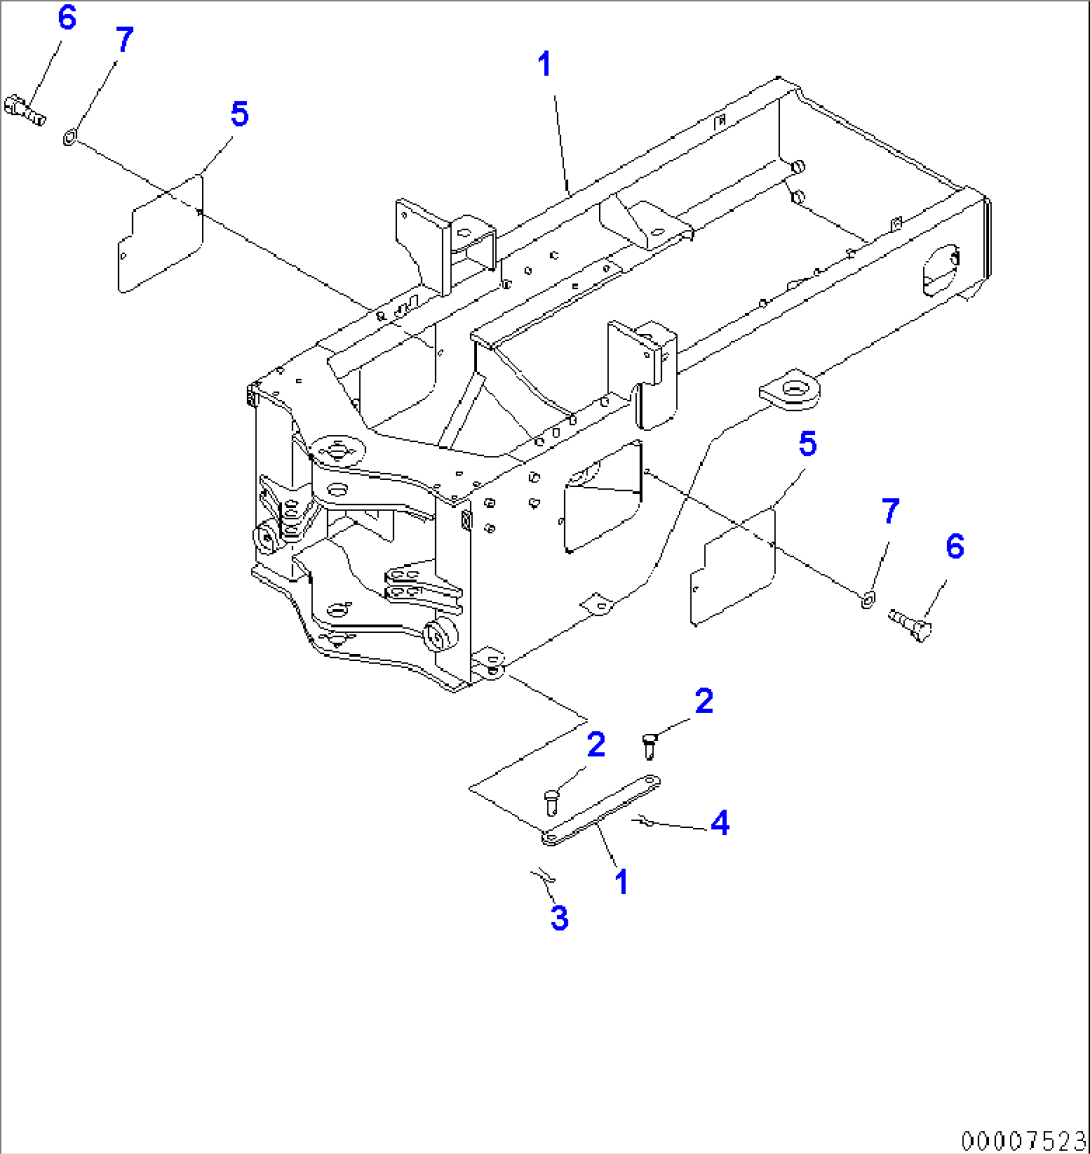 BAR LOCK AND COVER